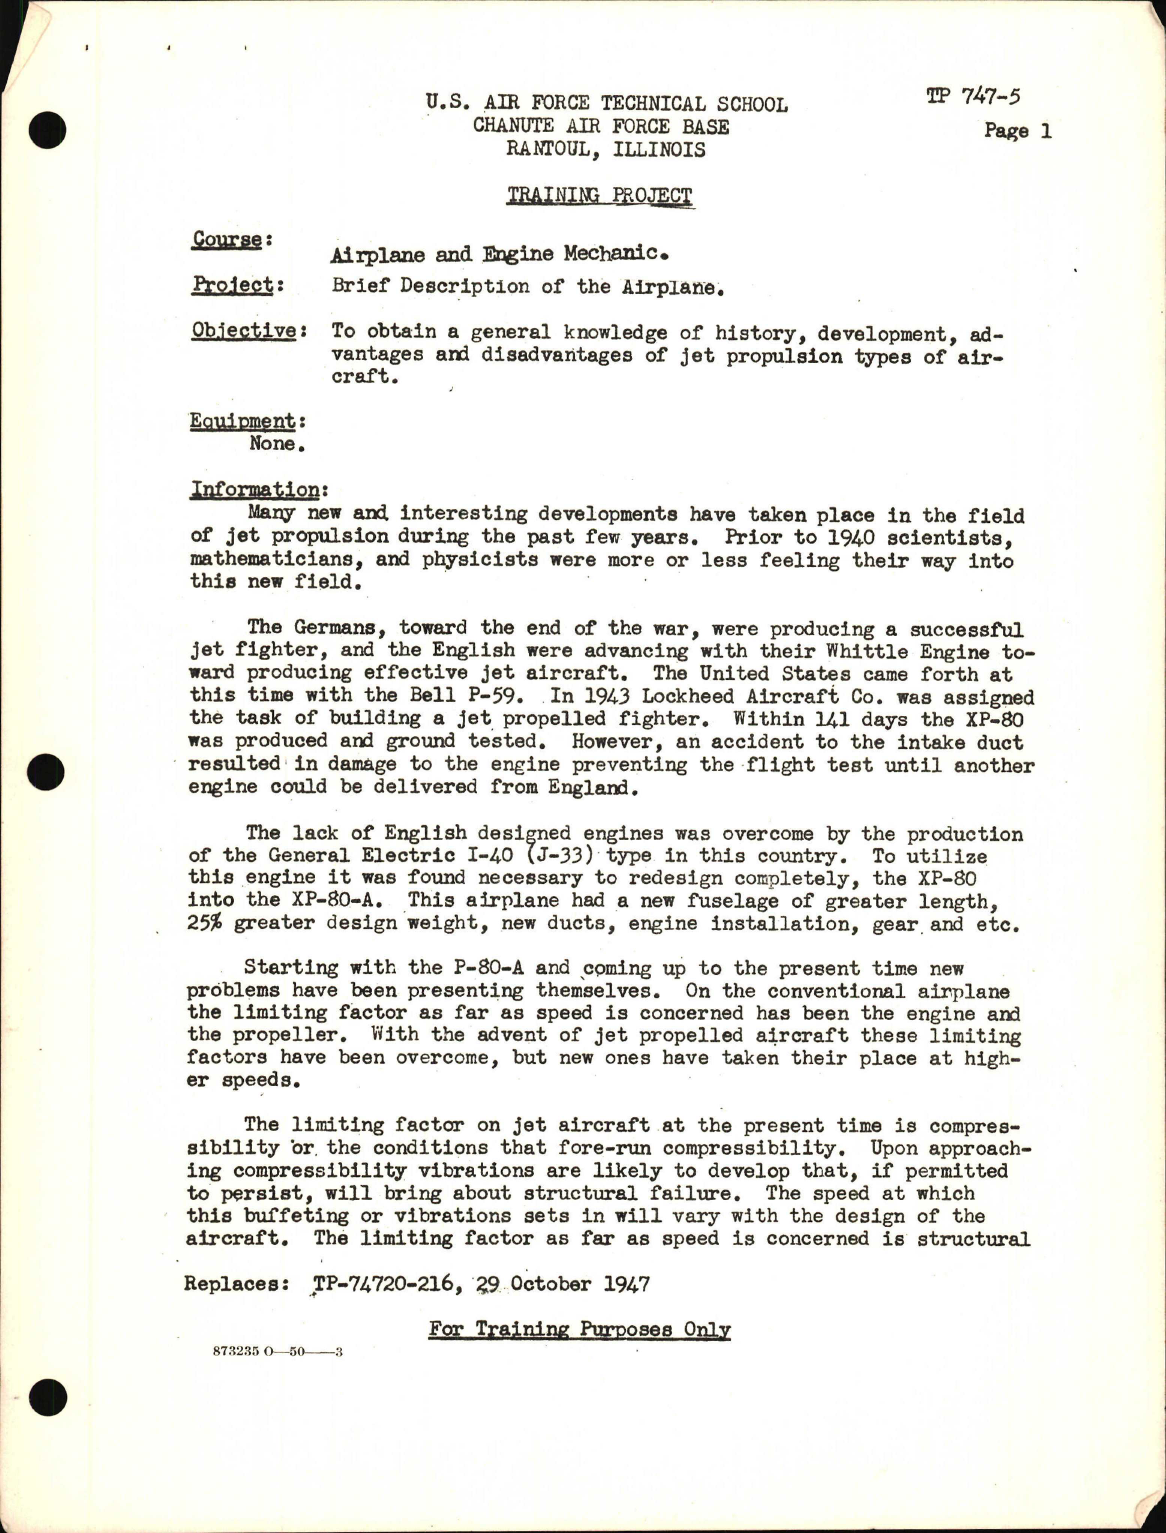 Sample page 1 from AirCorps Library document: Training Project, Brief Description of the Airplane